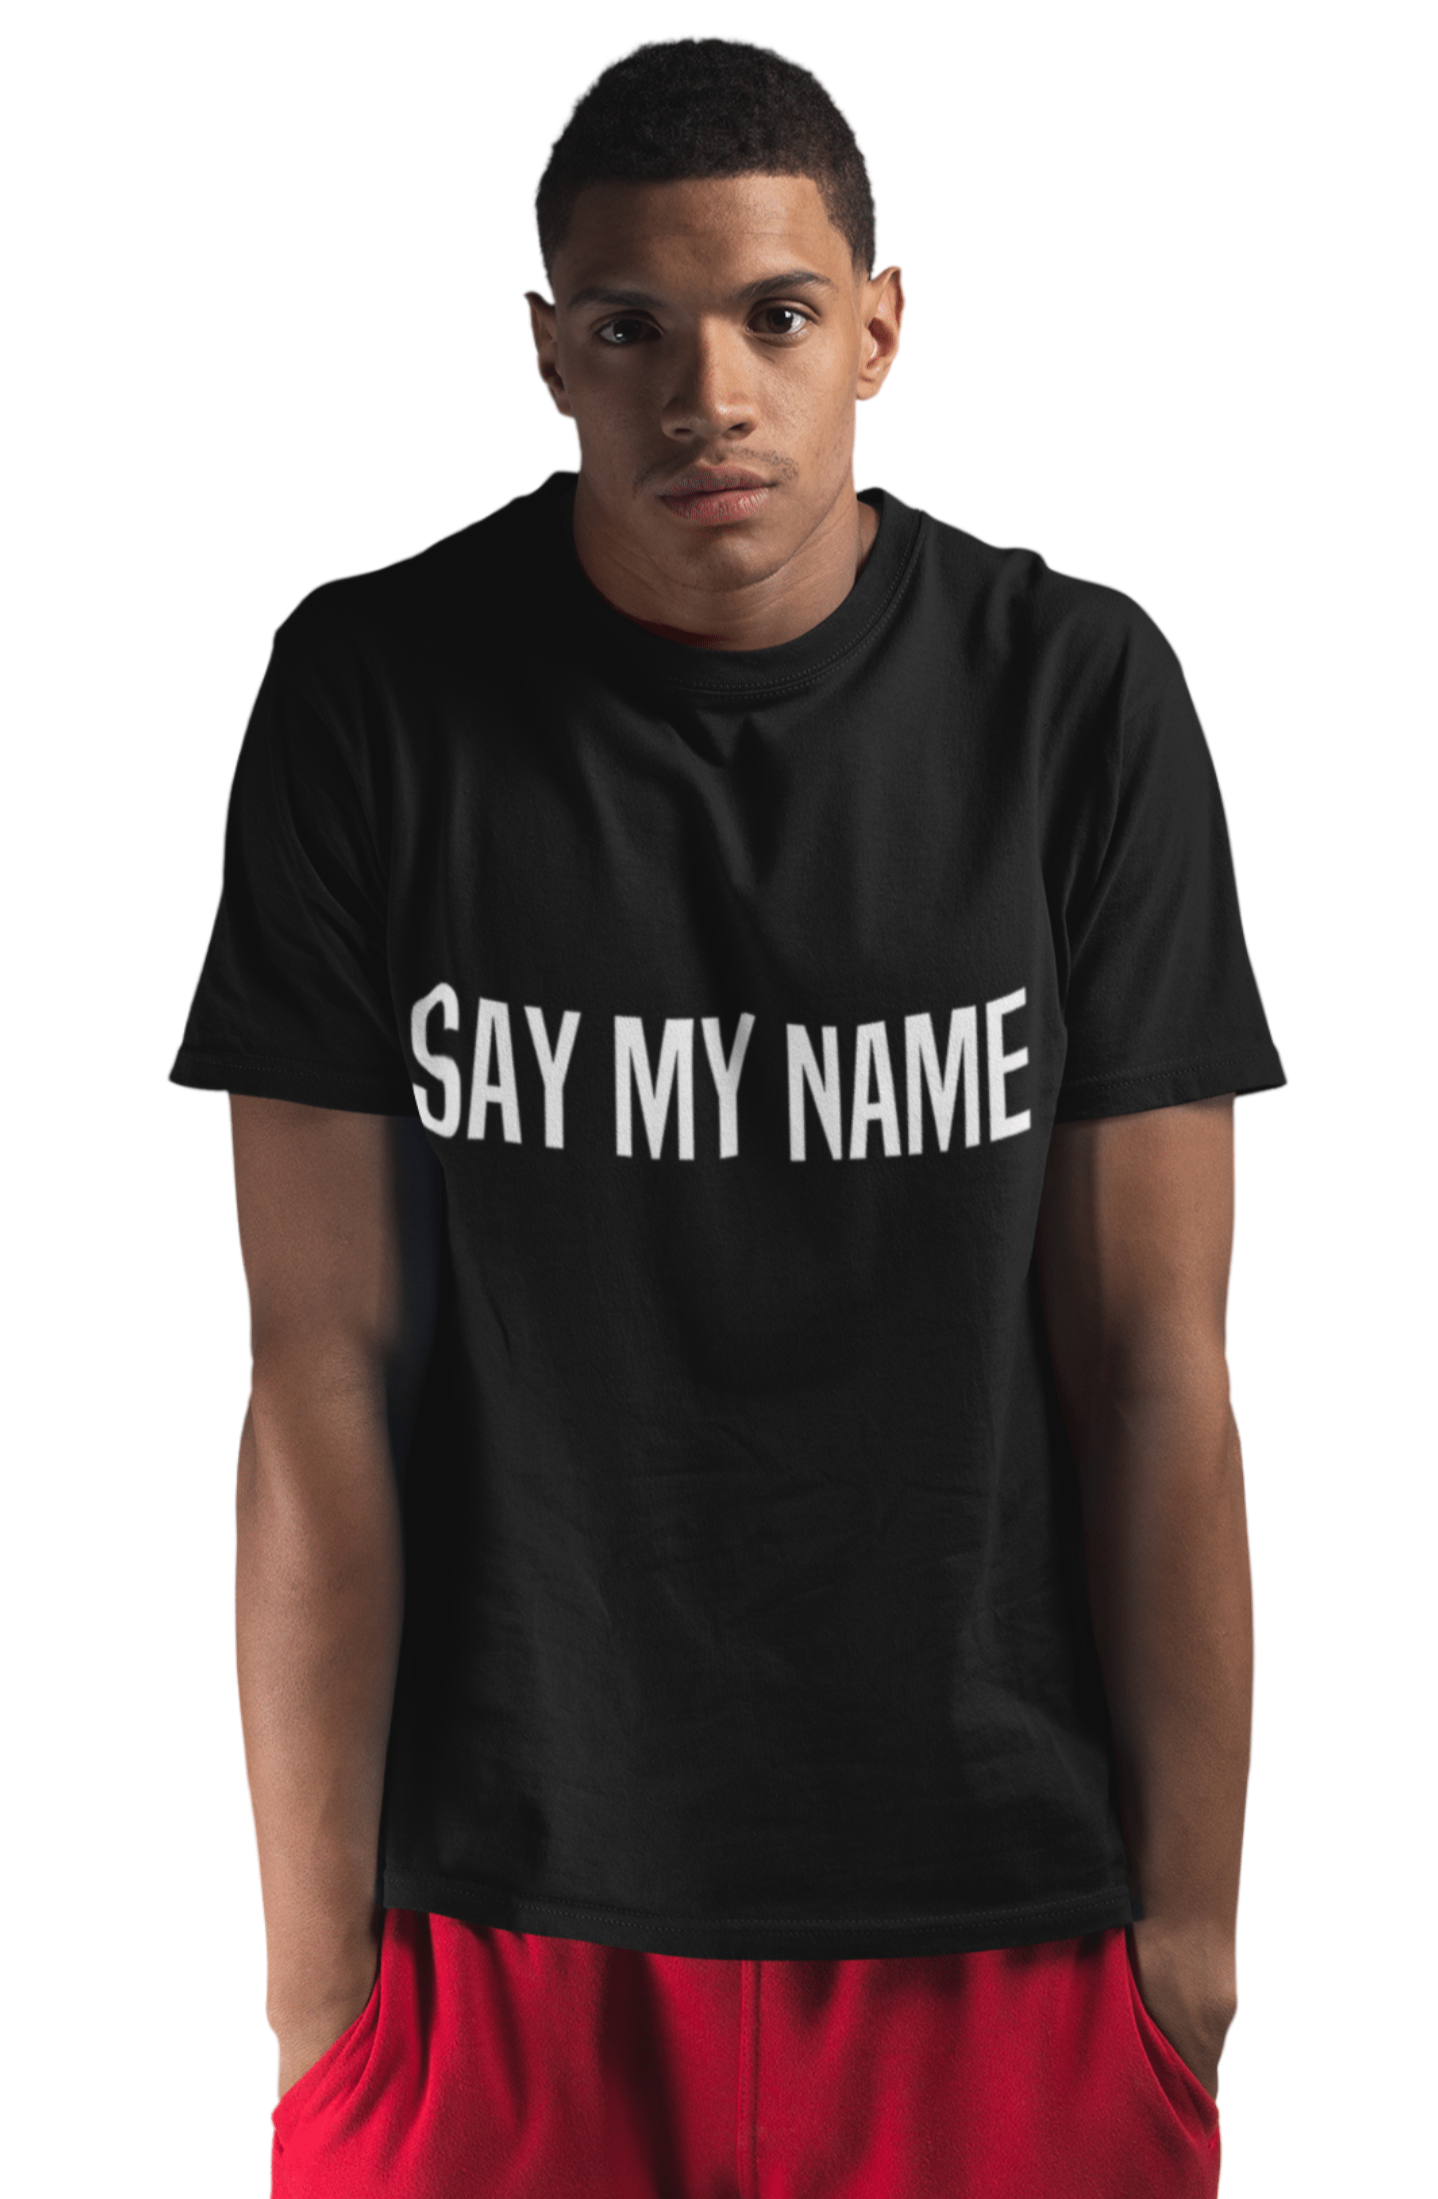 T-SHIRT CSG Homme "SAY MY NAME"